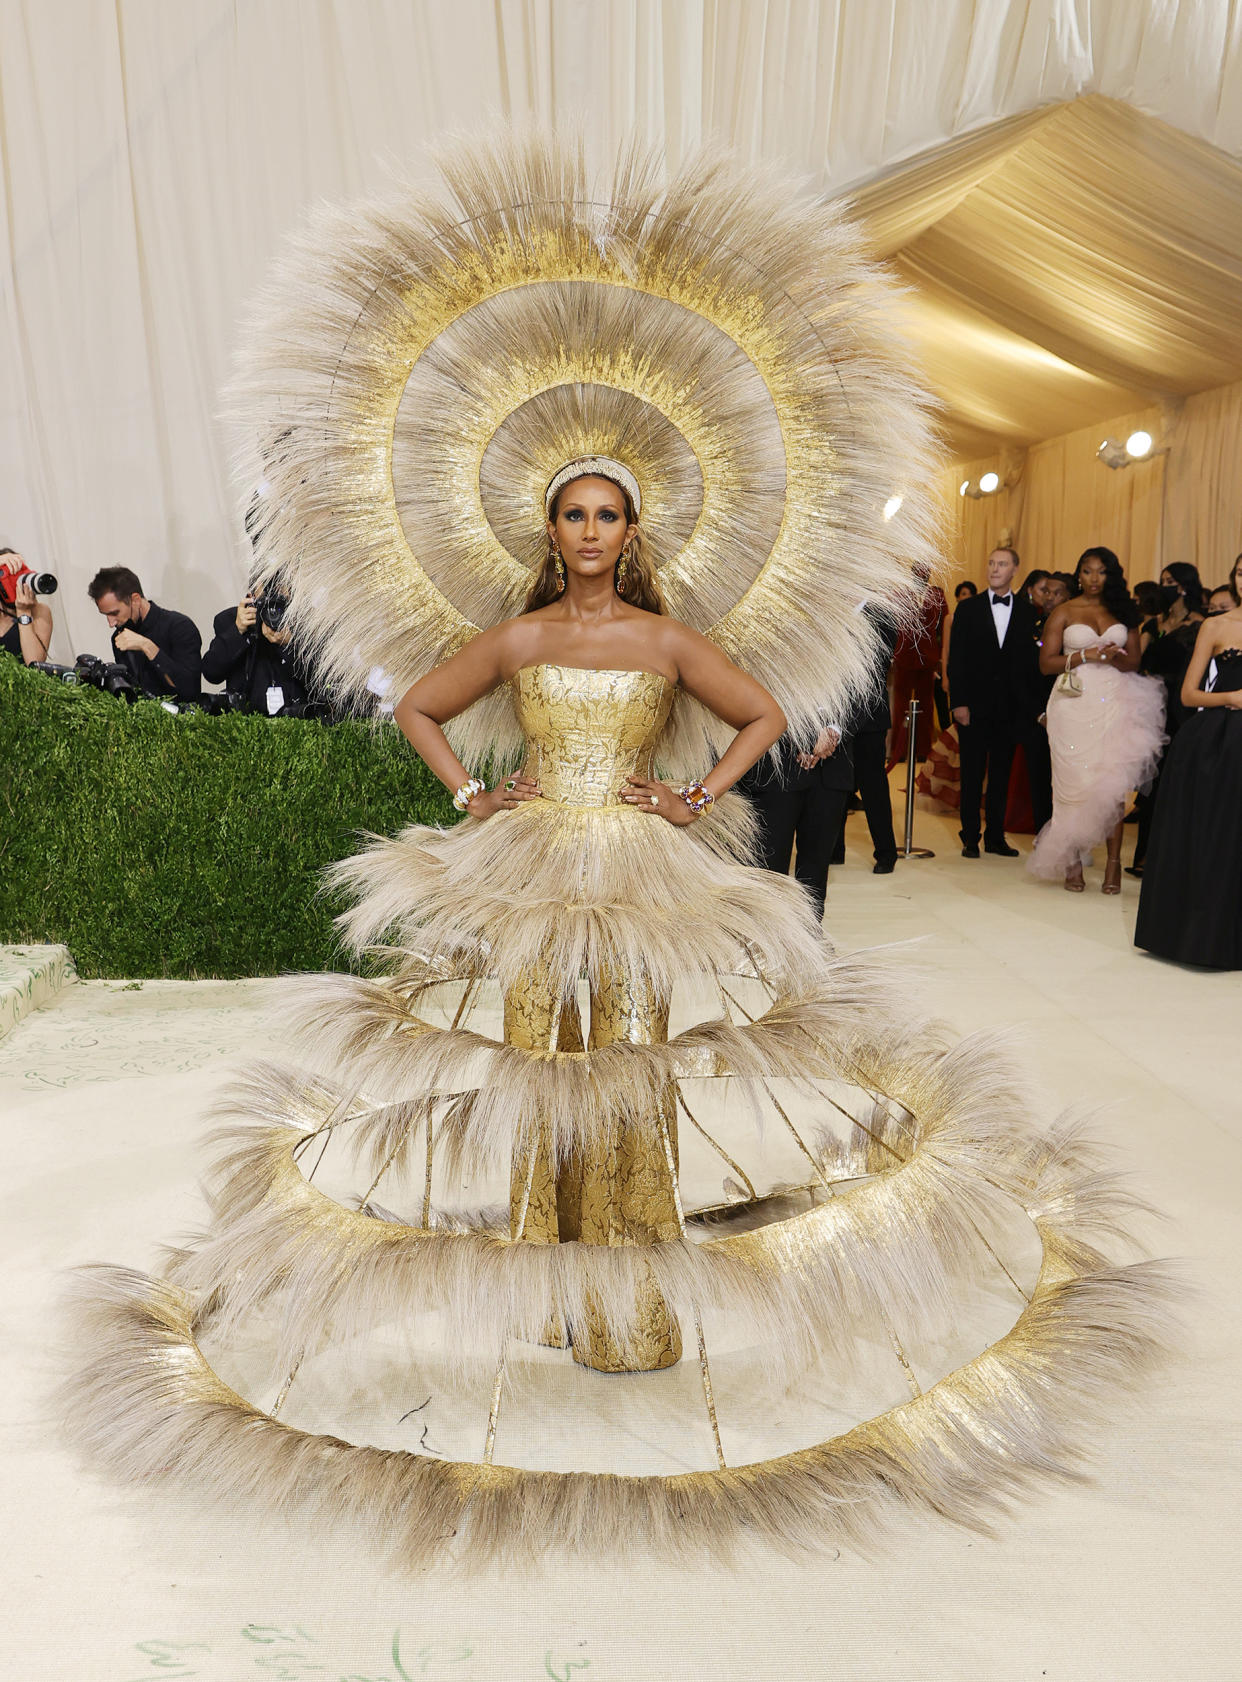 Iman attends The 2021 Met Gala Celebrating In America (Mike Coppola / Getty Images)